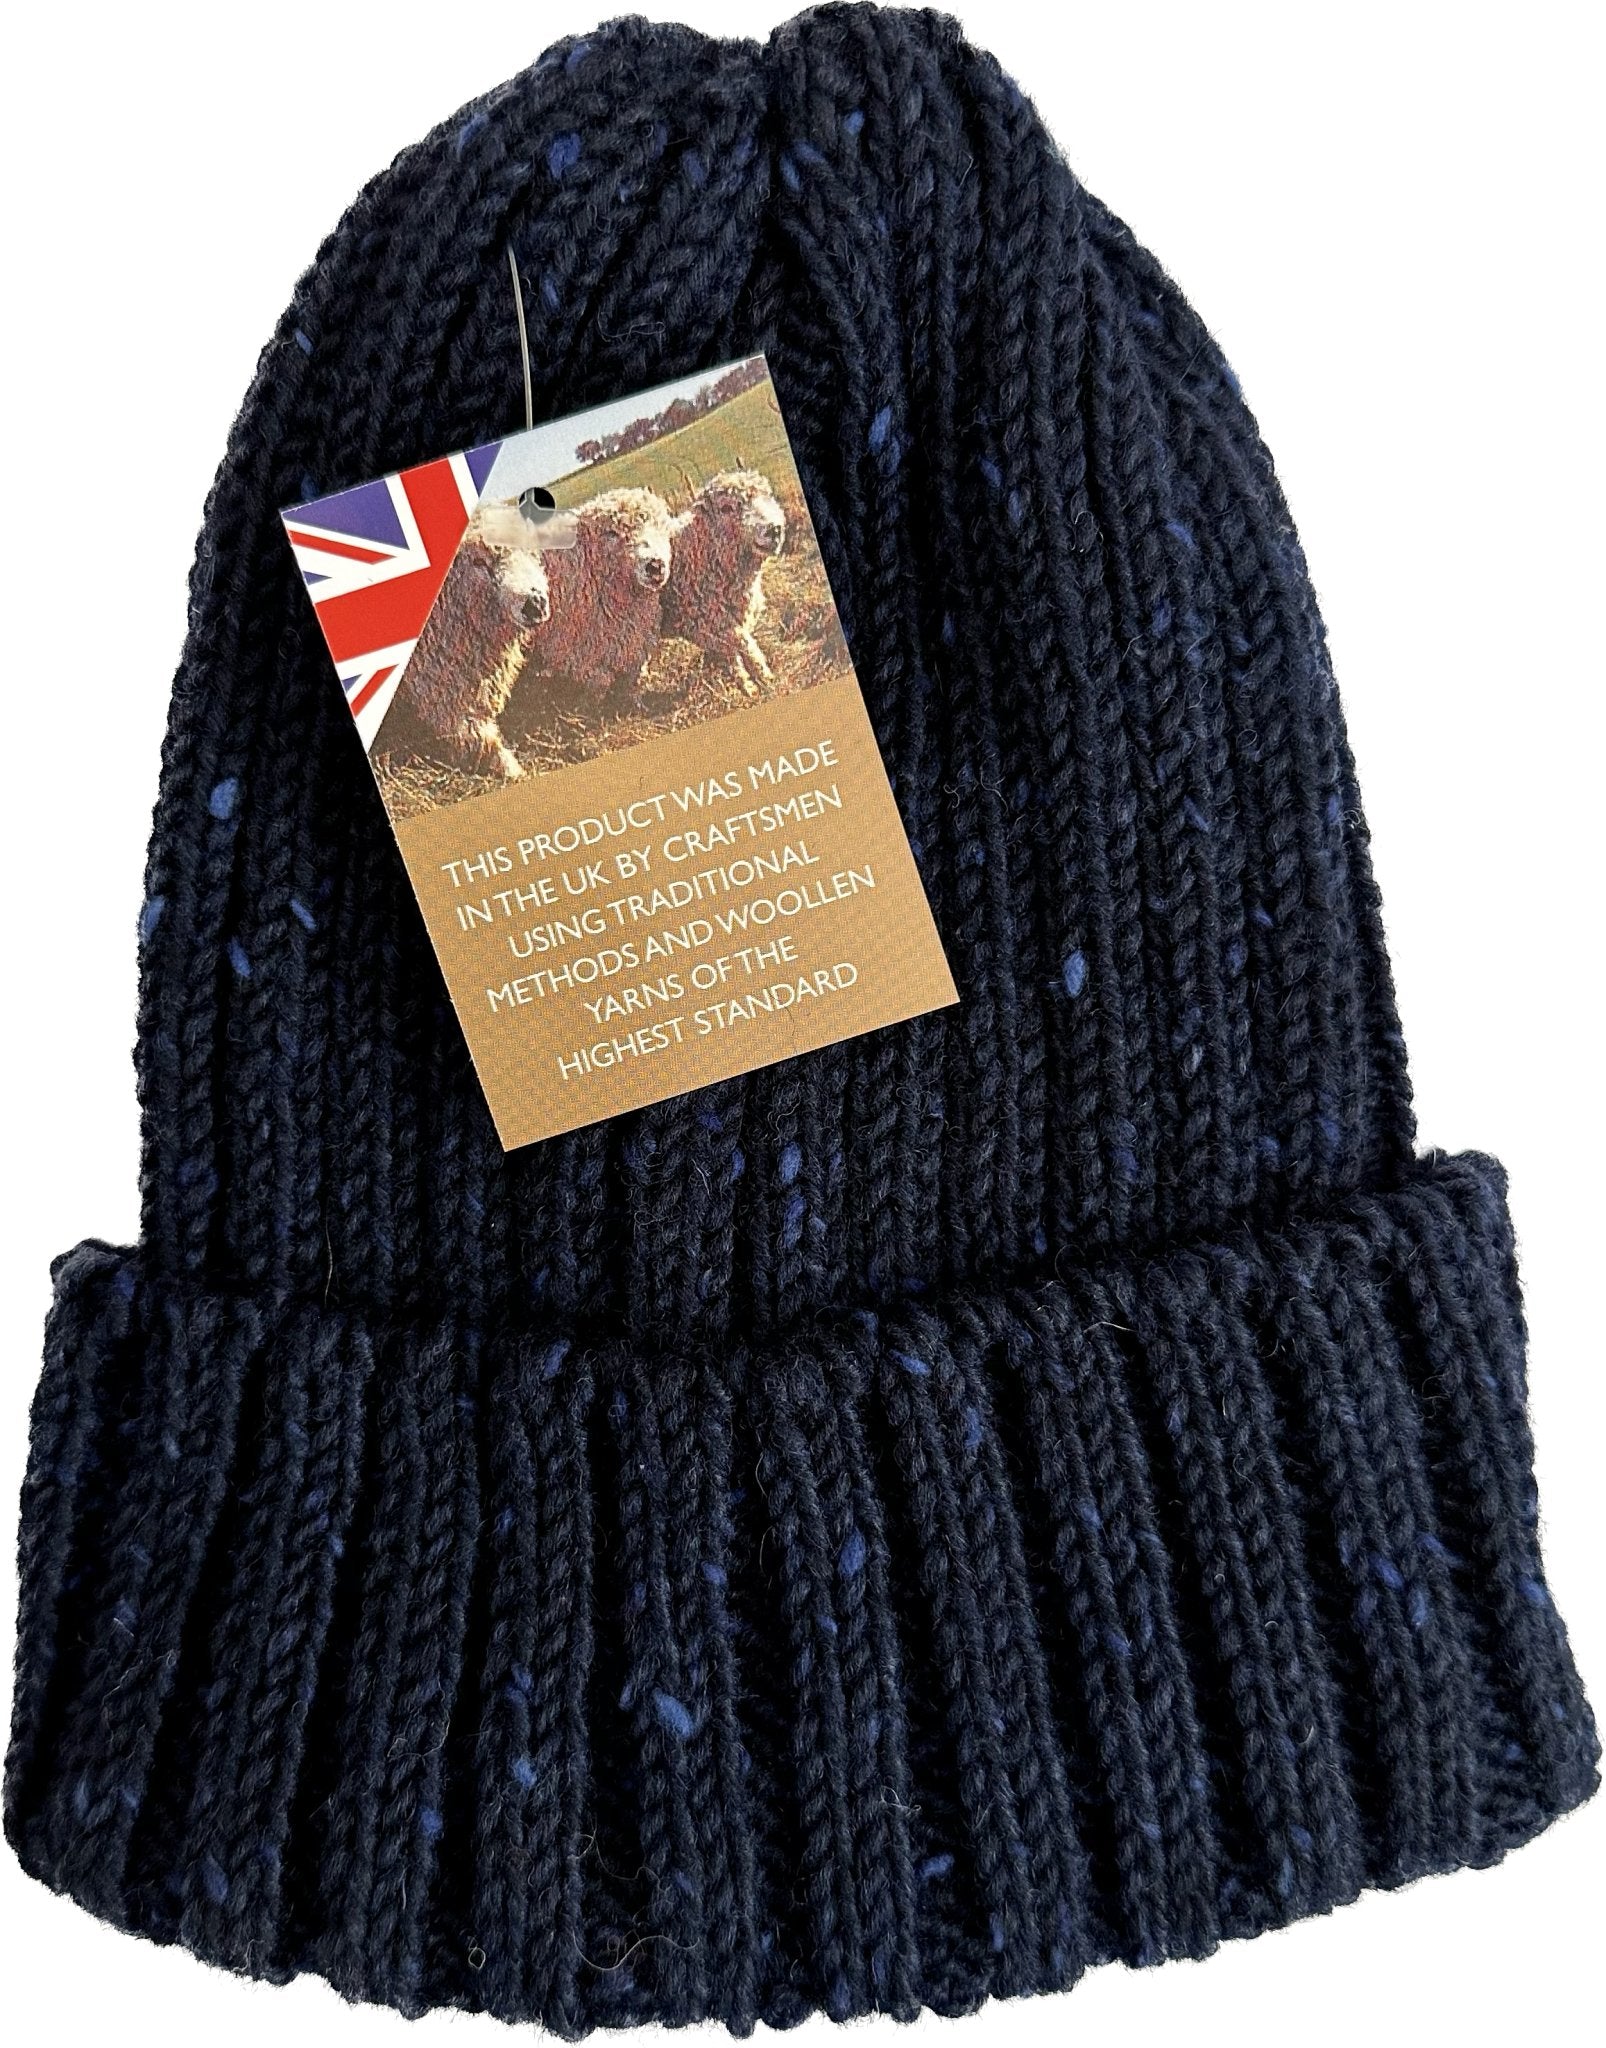 Cuffia coste donegal lana navy Highland2000 - MONSIEUR